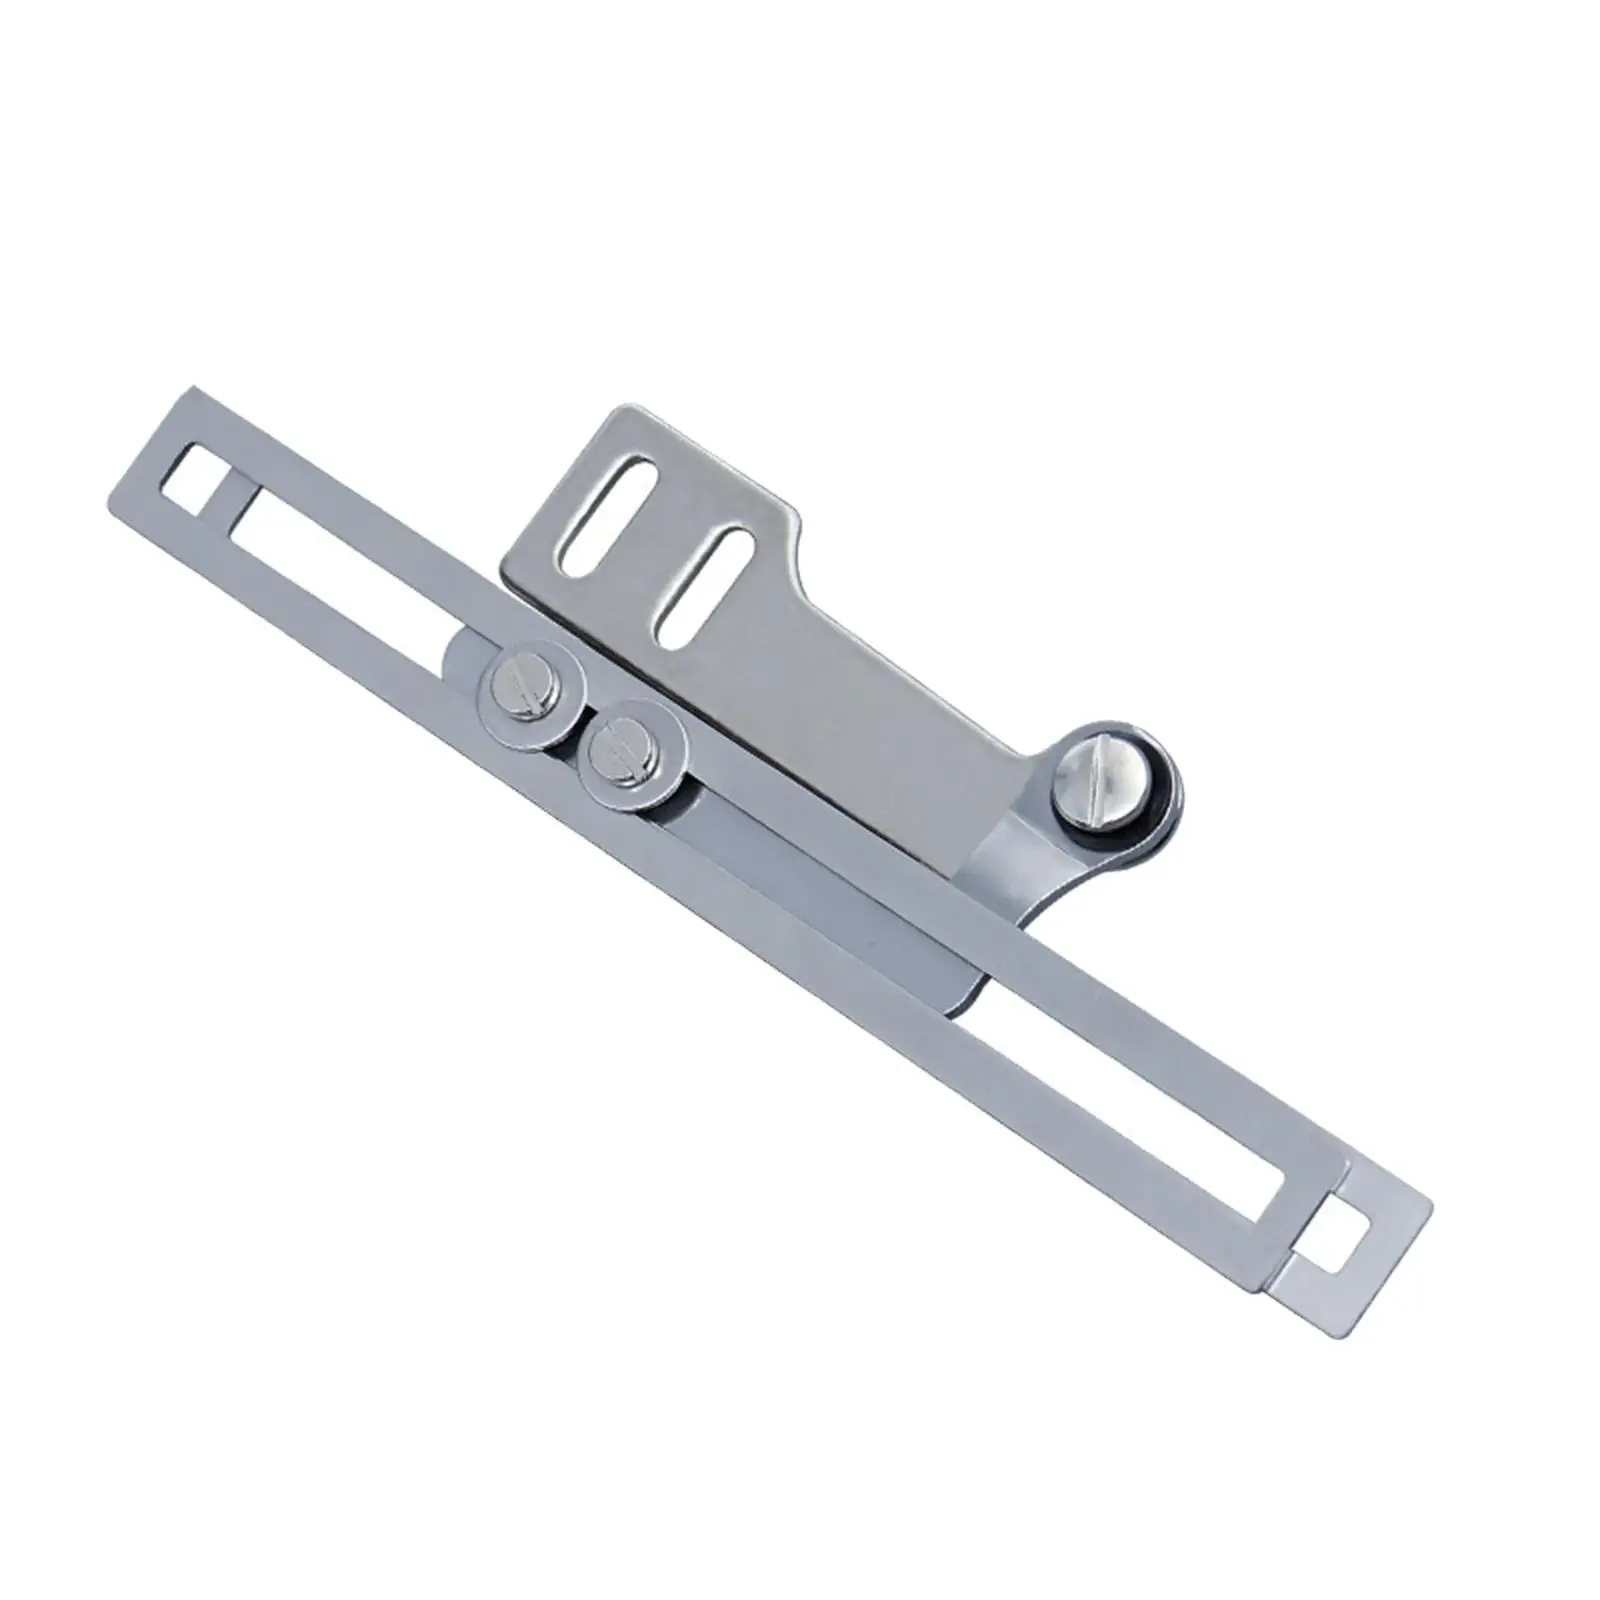 Sew Presser Foot Zipper Sewing Presser Foot Guide for Sewing